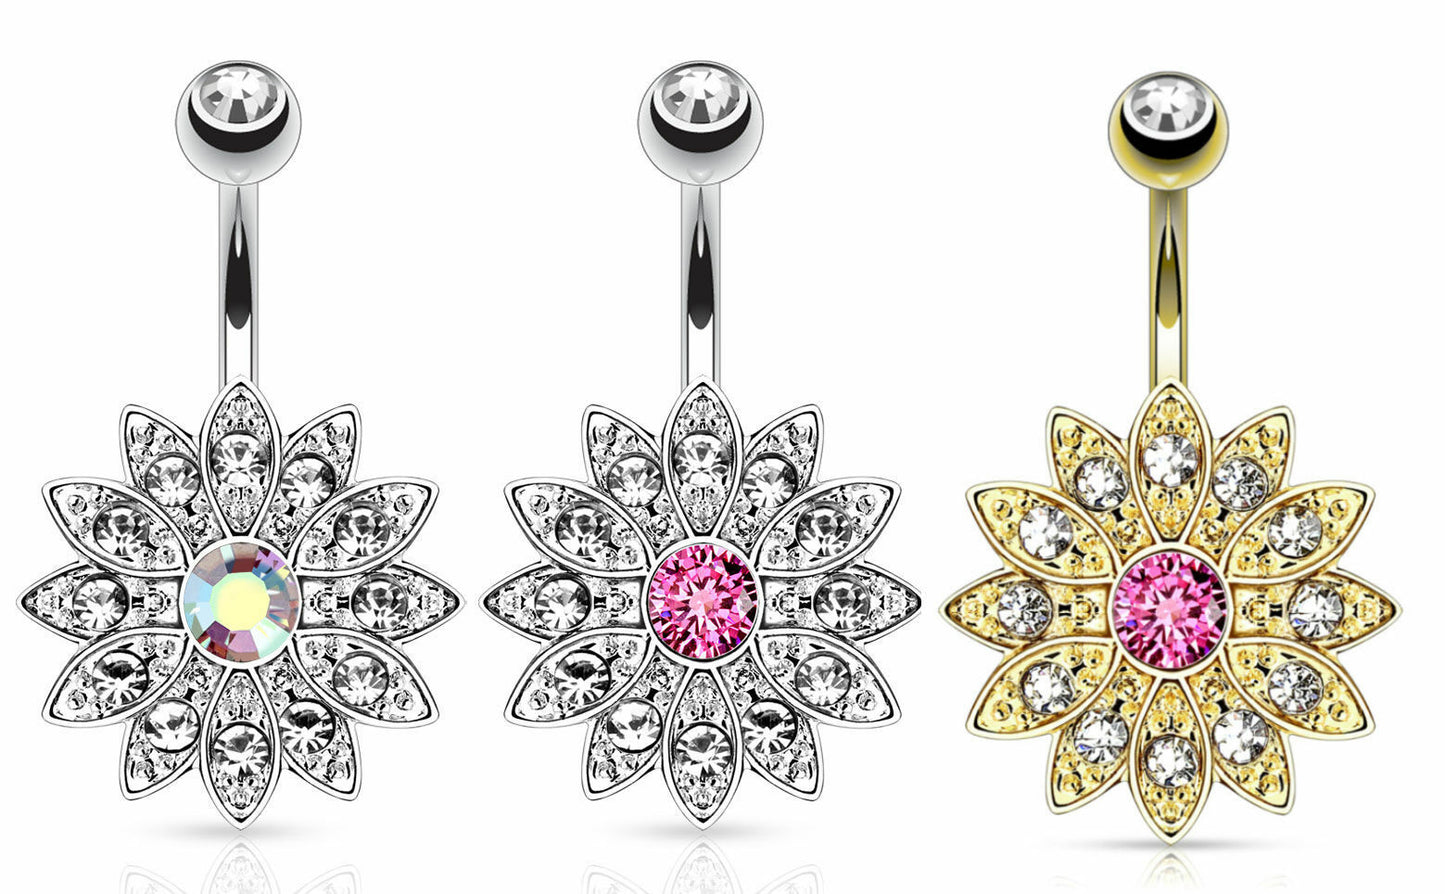 1pc Flower w/ Center Crystal Paved Petals Belly Button Ring Pierced Navel